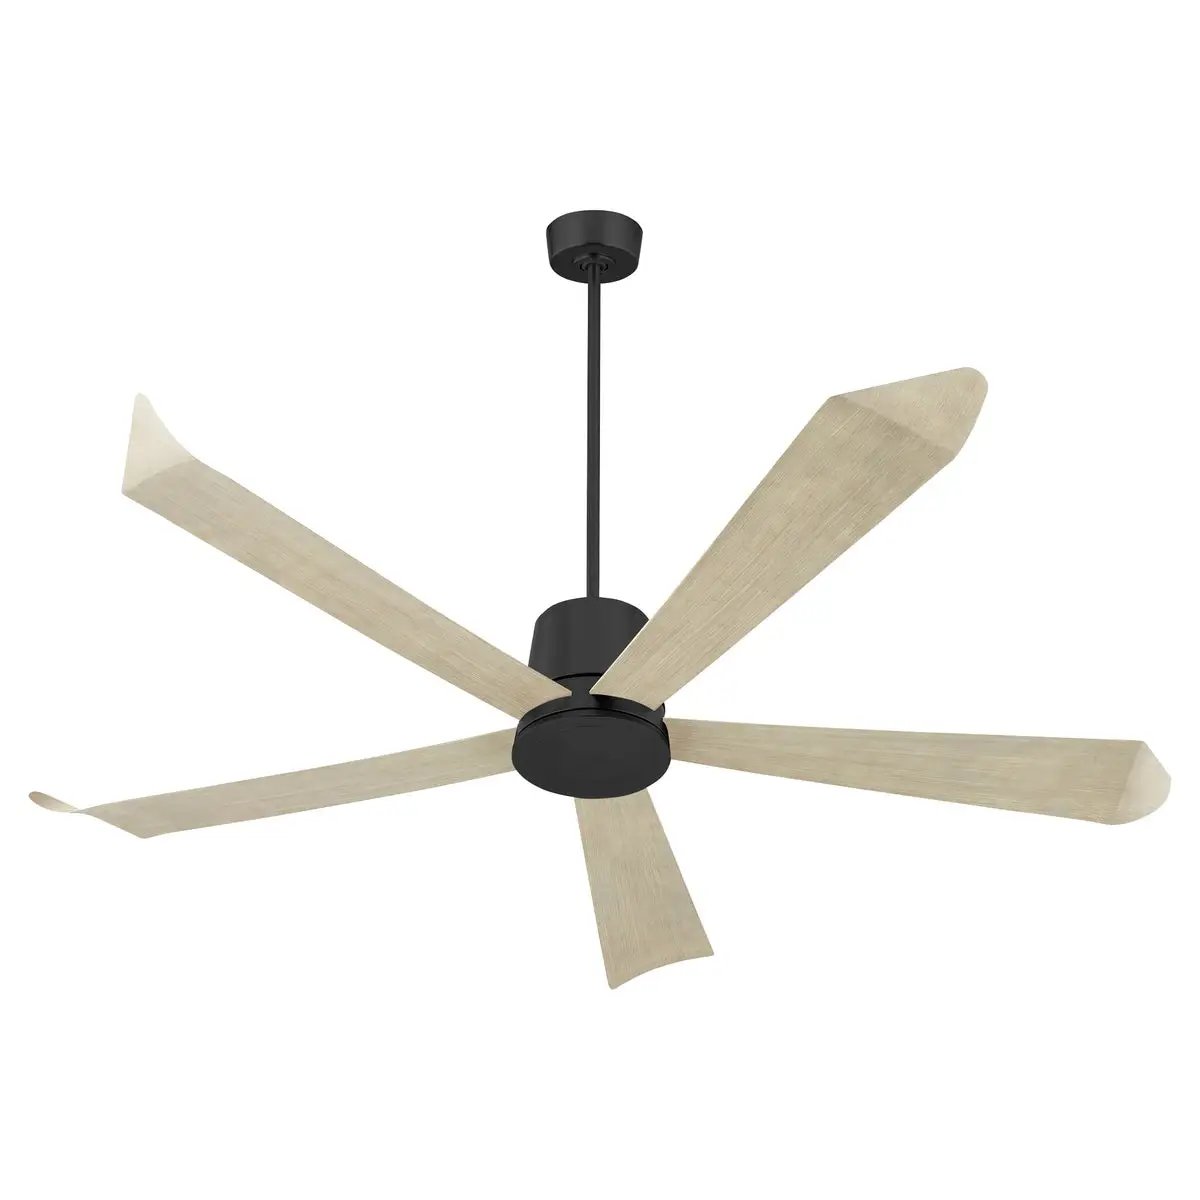 Smart Ceiling Fan with elongated upturned blades and optional light kits. Elevate any room with this Quorum International fan.